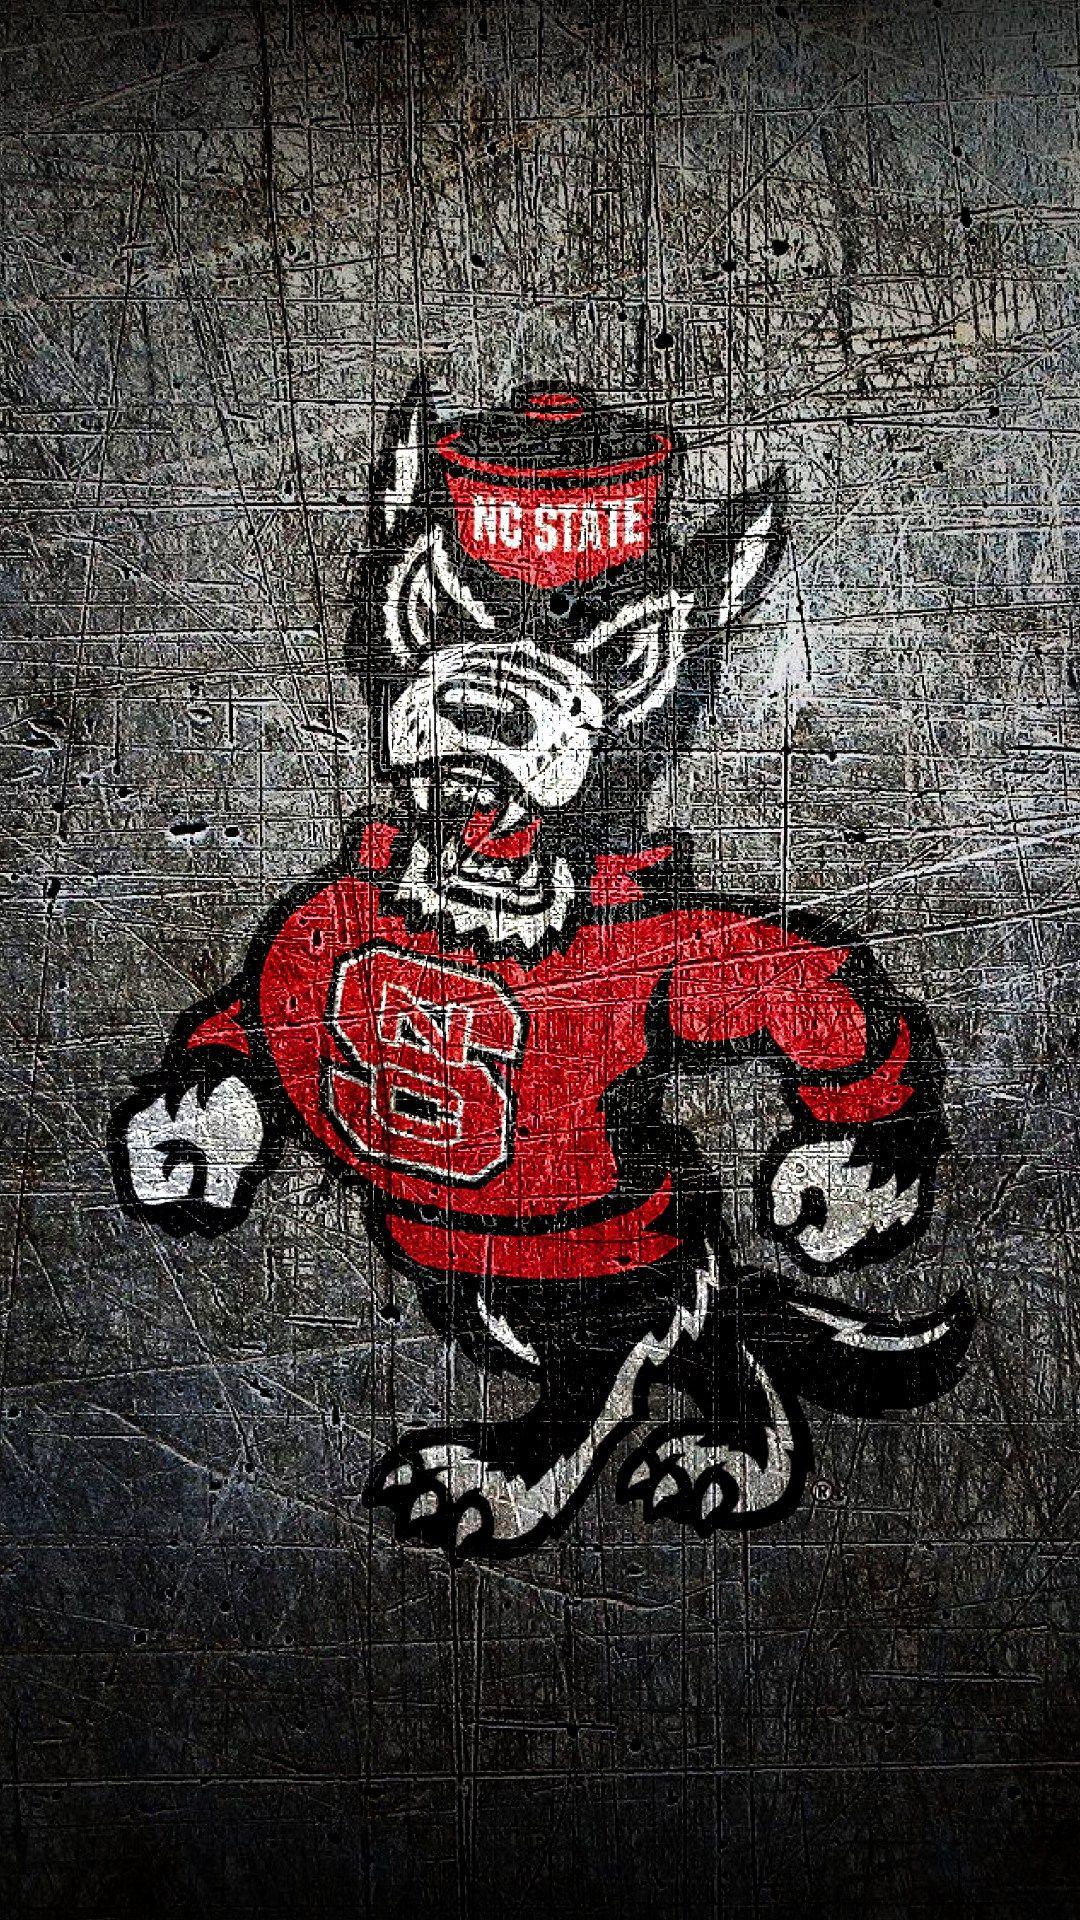 Free download include desktop wallpaper wallpaper nc state and nc state  wallpaper 500x334 for your Desktop Mobile  Tablet  Explore 46 NC  State Wallpaper Computer  NC State Wolfpack Wallpaper NC